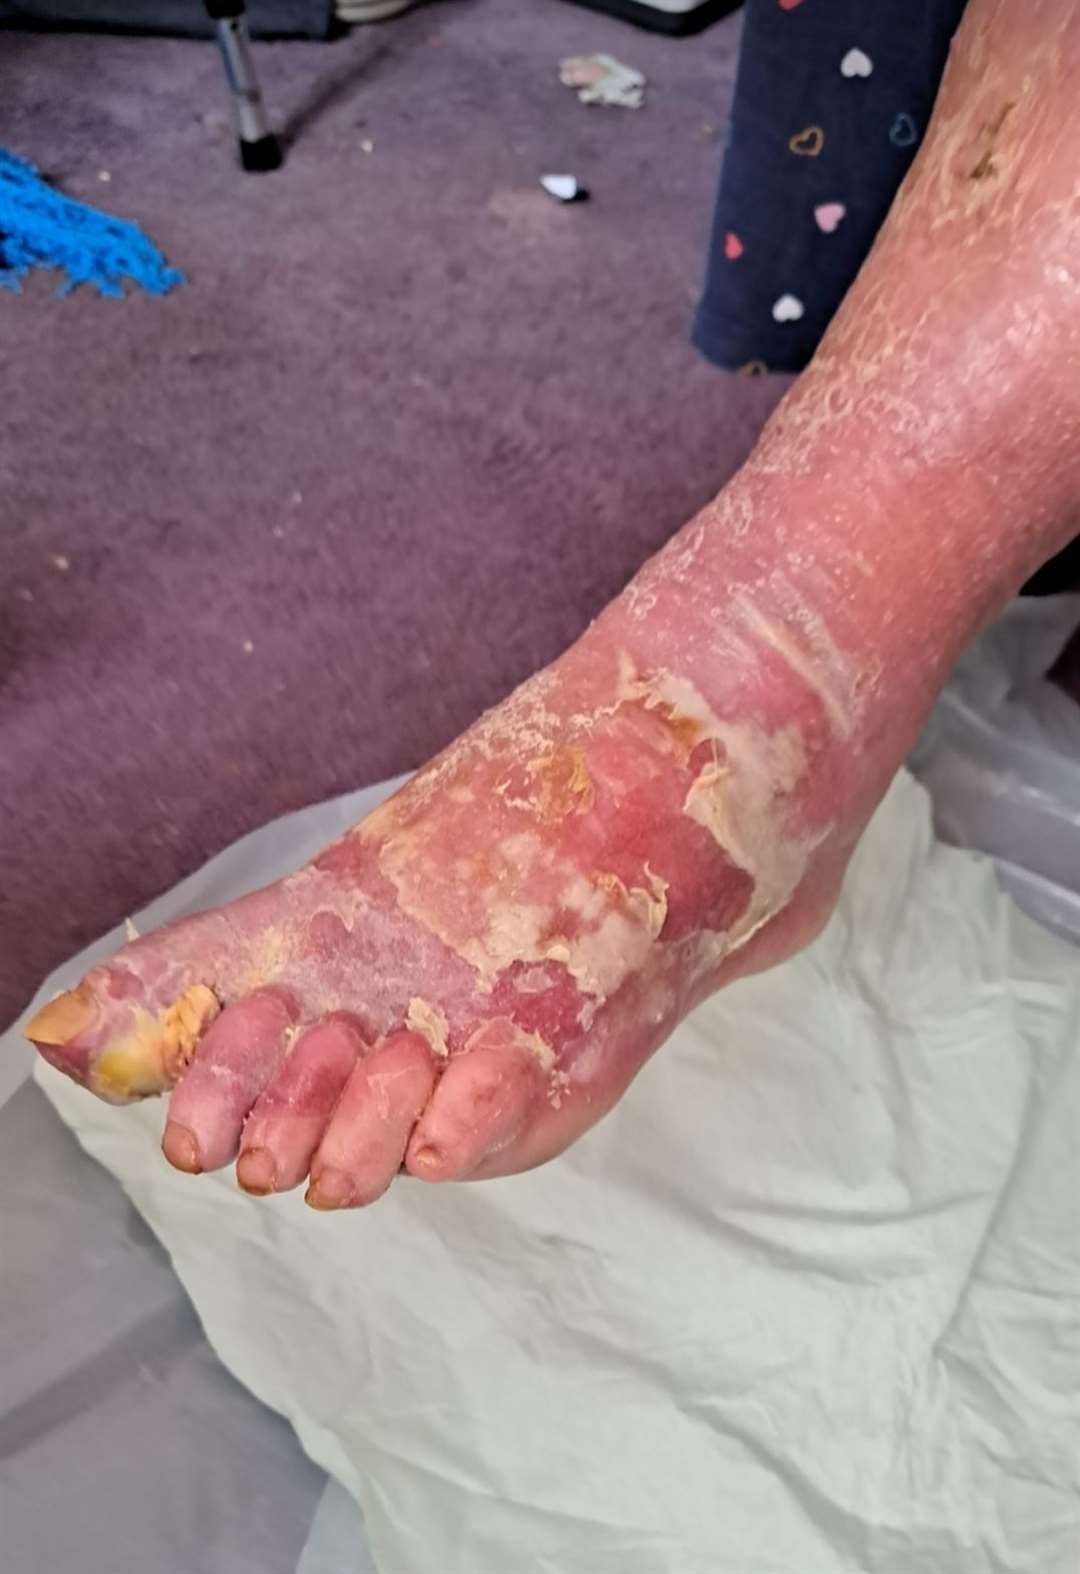 Granddaughter Kimberley Bracey took additional photos of her nan's foot after suspecting something was wrong. Photo: Family release